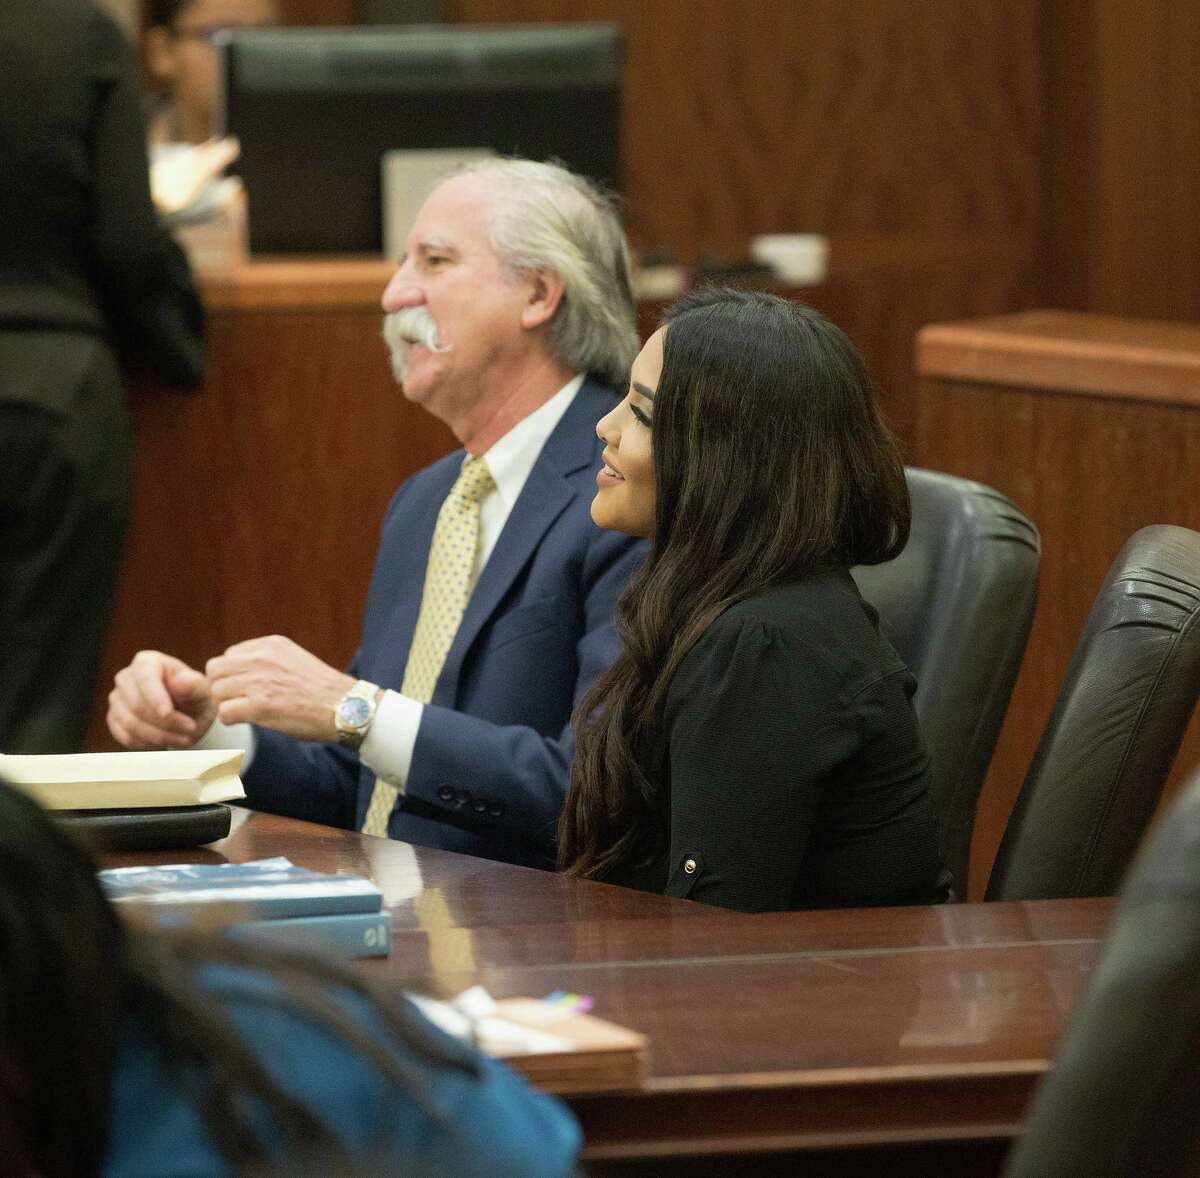 Alexandria Vera, 24, a former Aldine ISD teacher arrives sits with her attorney Ricardo Rodriguez as they wait for her hearing to begin. Vera accepted a charge of aggravated sexual assault of a child, which has a maximum sentence of life in prison. However, under the plea deal, her possible punishment is capped at 30 years and she is eligible for deferred adjudication probation.